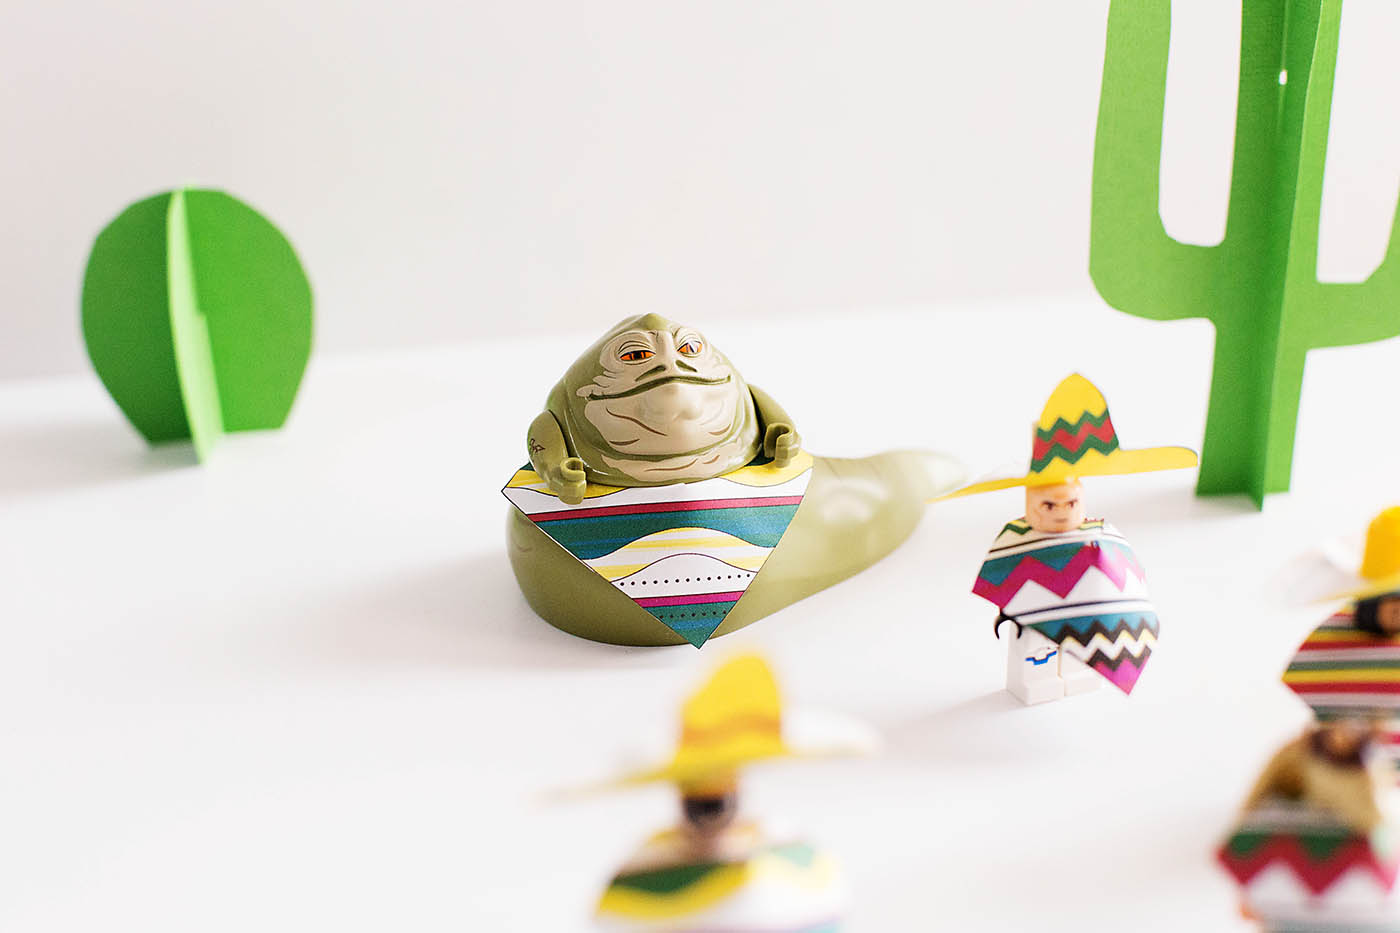 Printable sombreros and ponchos for LEGO minifigures - May the fourth AND fifth be with you!